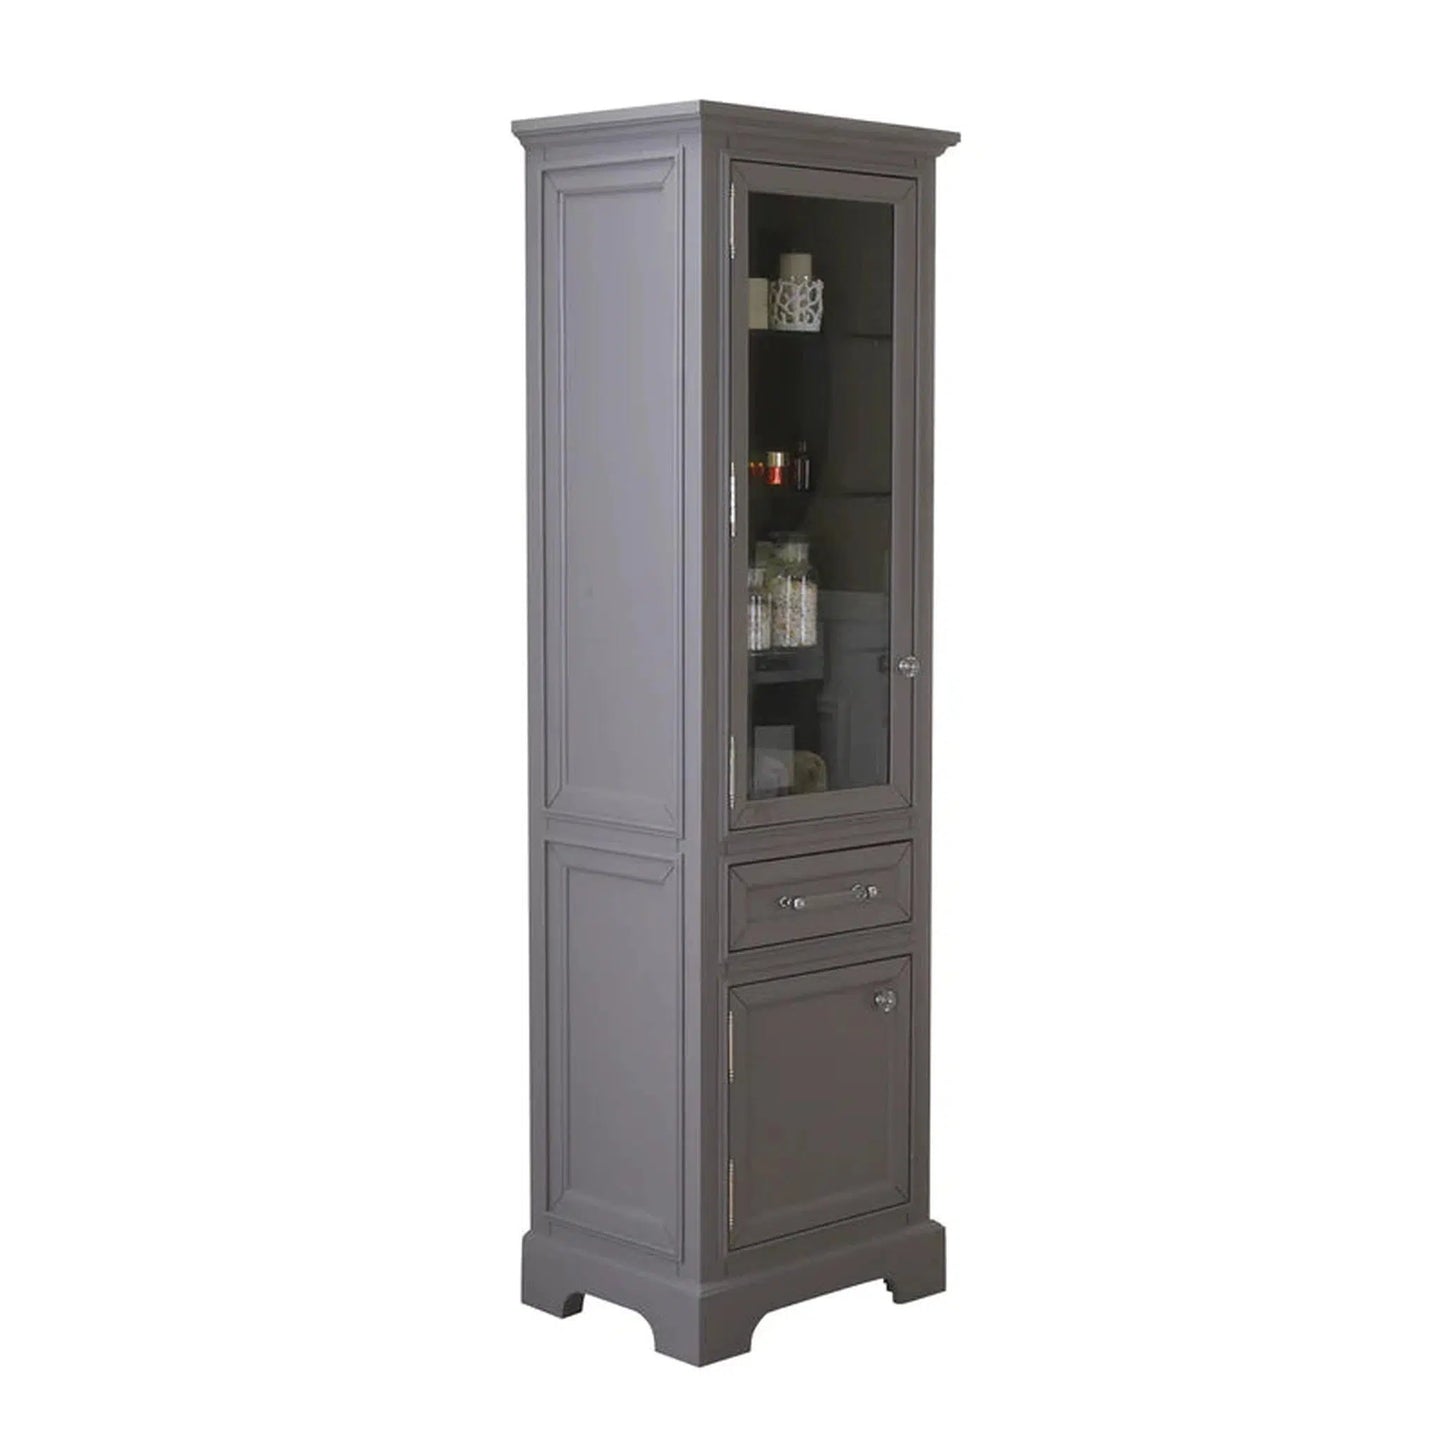 Water Creation Derby Collection Linen Cabinet In Cashmere Grey